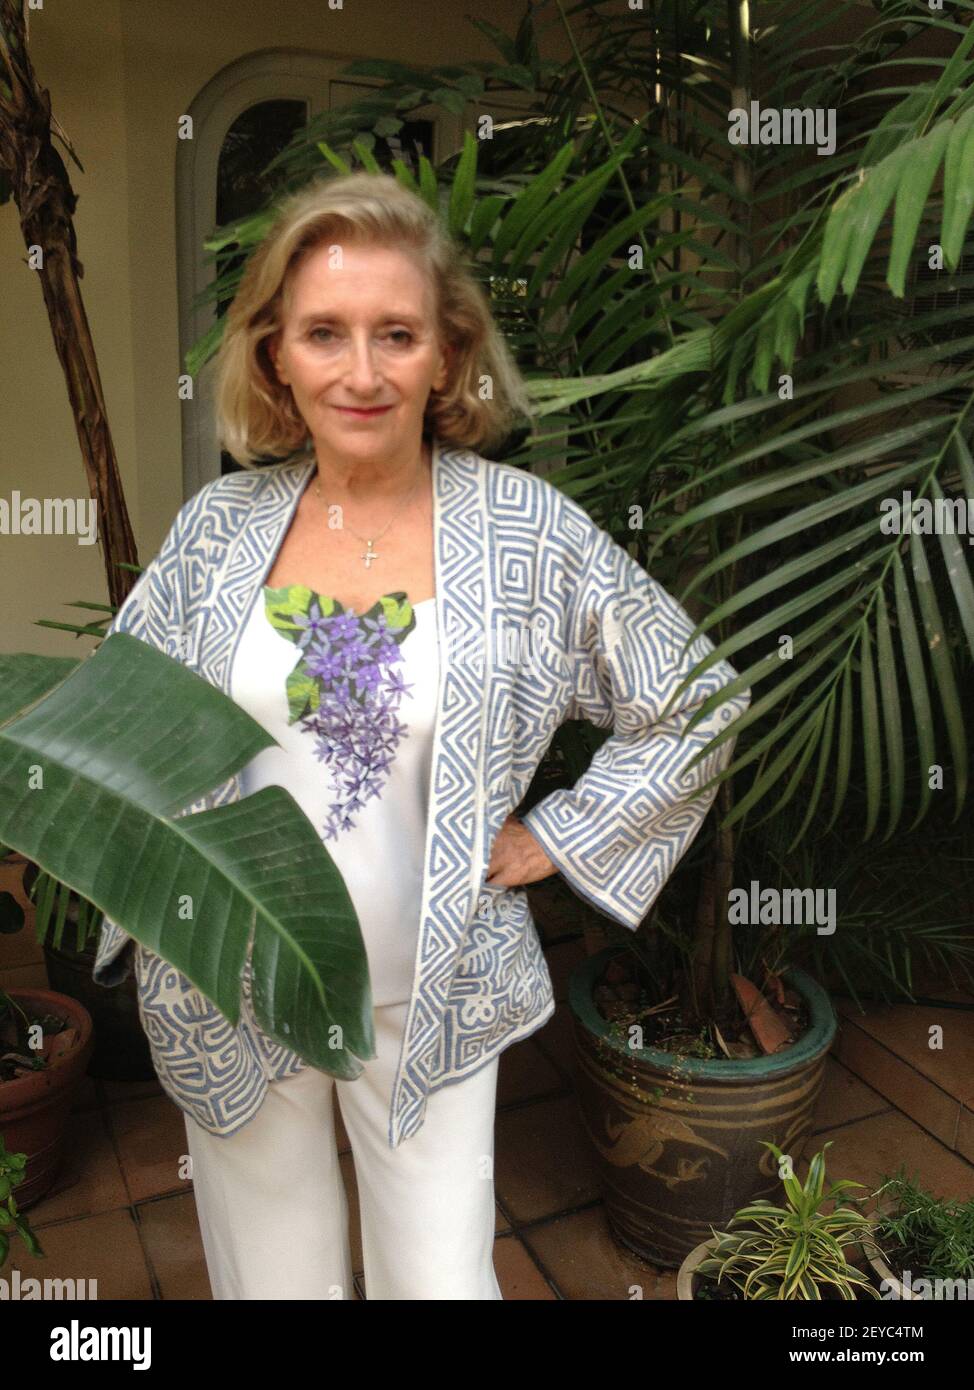 Fashion designer Helene Breebaart models her best-selling mola-inspired  design: a two-tone jacket in denim fabric. The appliqued T-shirt she wears  is also of her design. (Photo by Mimi Whitefield/Miami Herald/MCT/Sipa USA  Stock